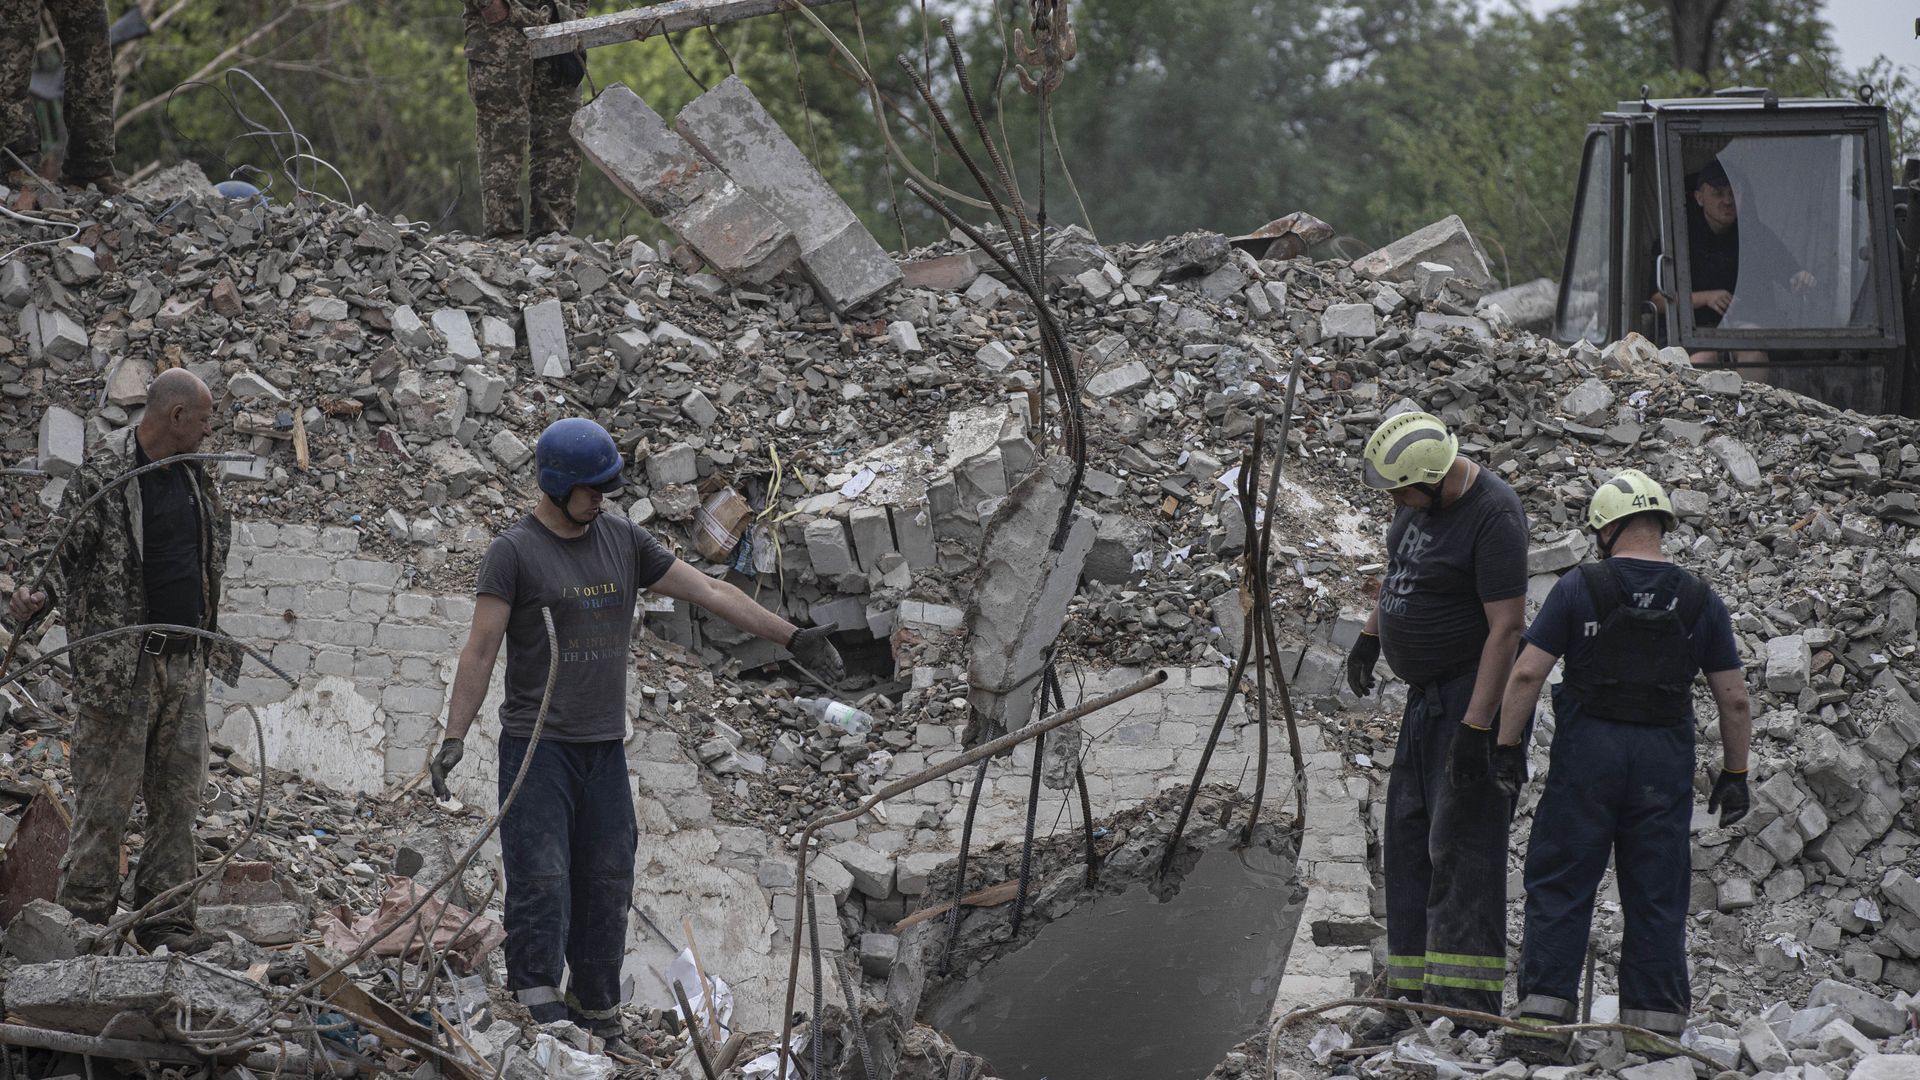  Firefighters conduct search and rescue operations on debris of buildings after Russian airstrikes hit residential areas in Chasiv Yar, Donetsk, Ukraine on July 11